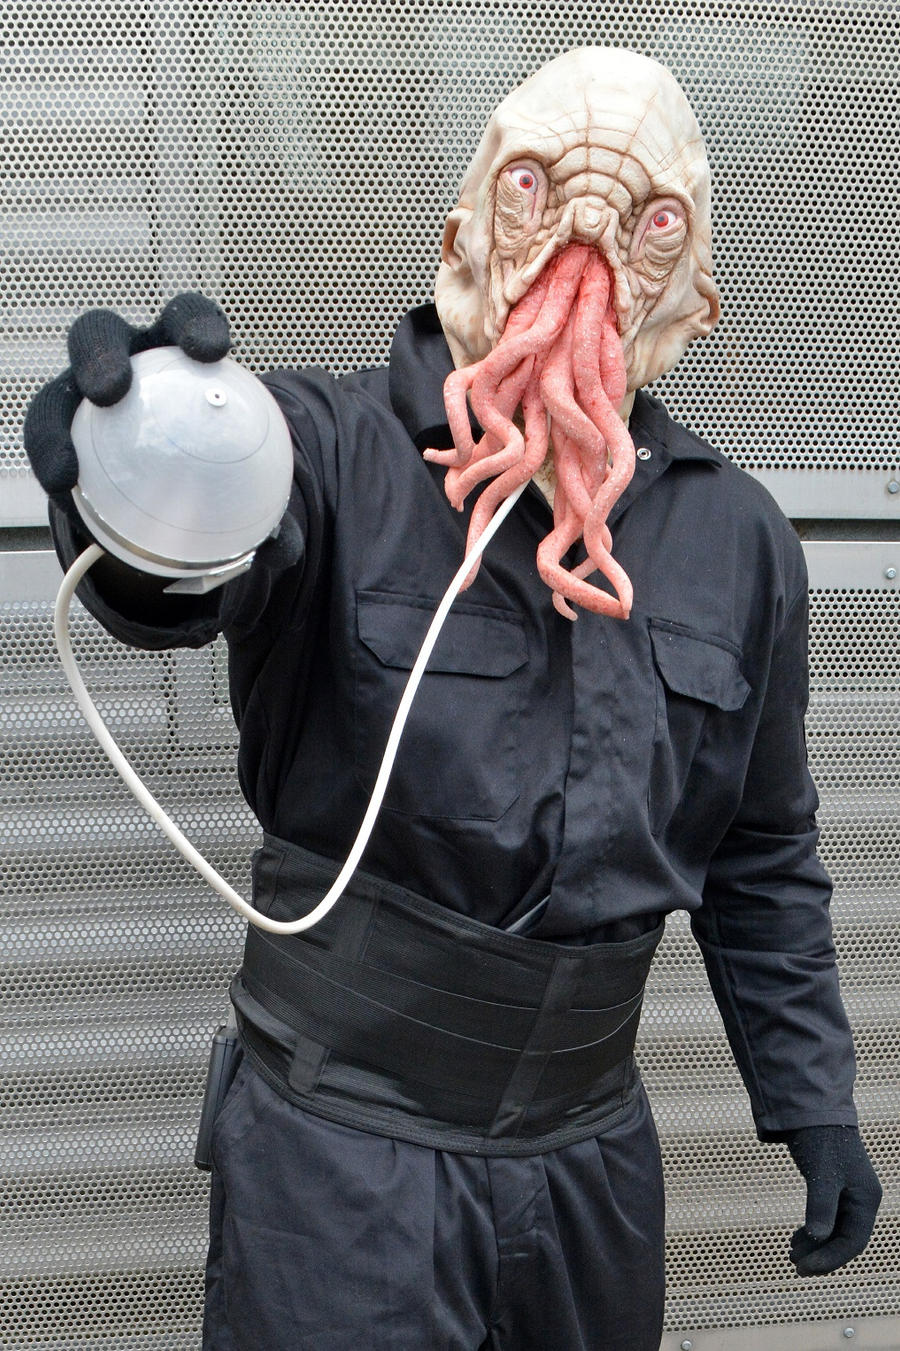 Ood Cosplay at the NSC 2015 (6)